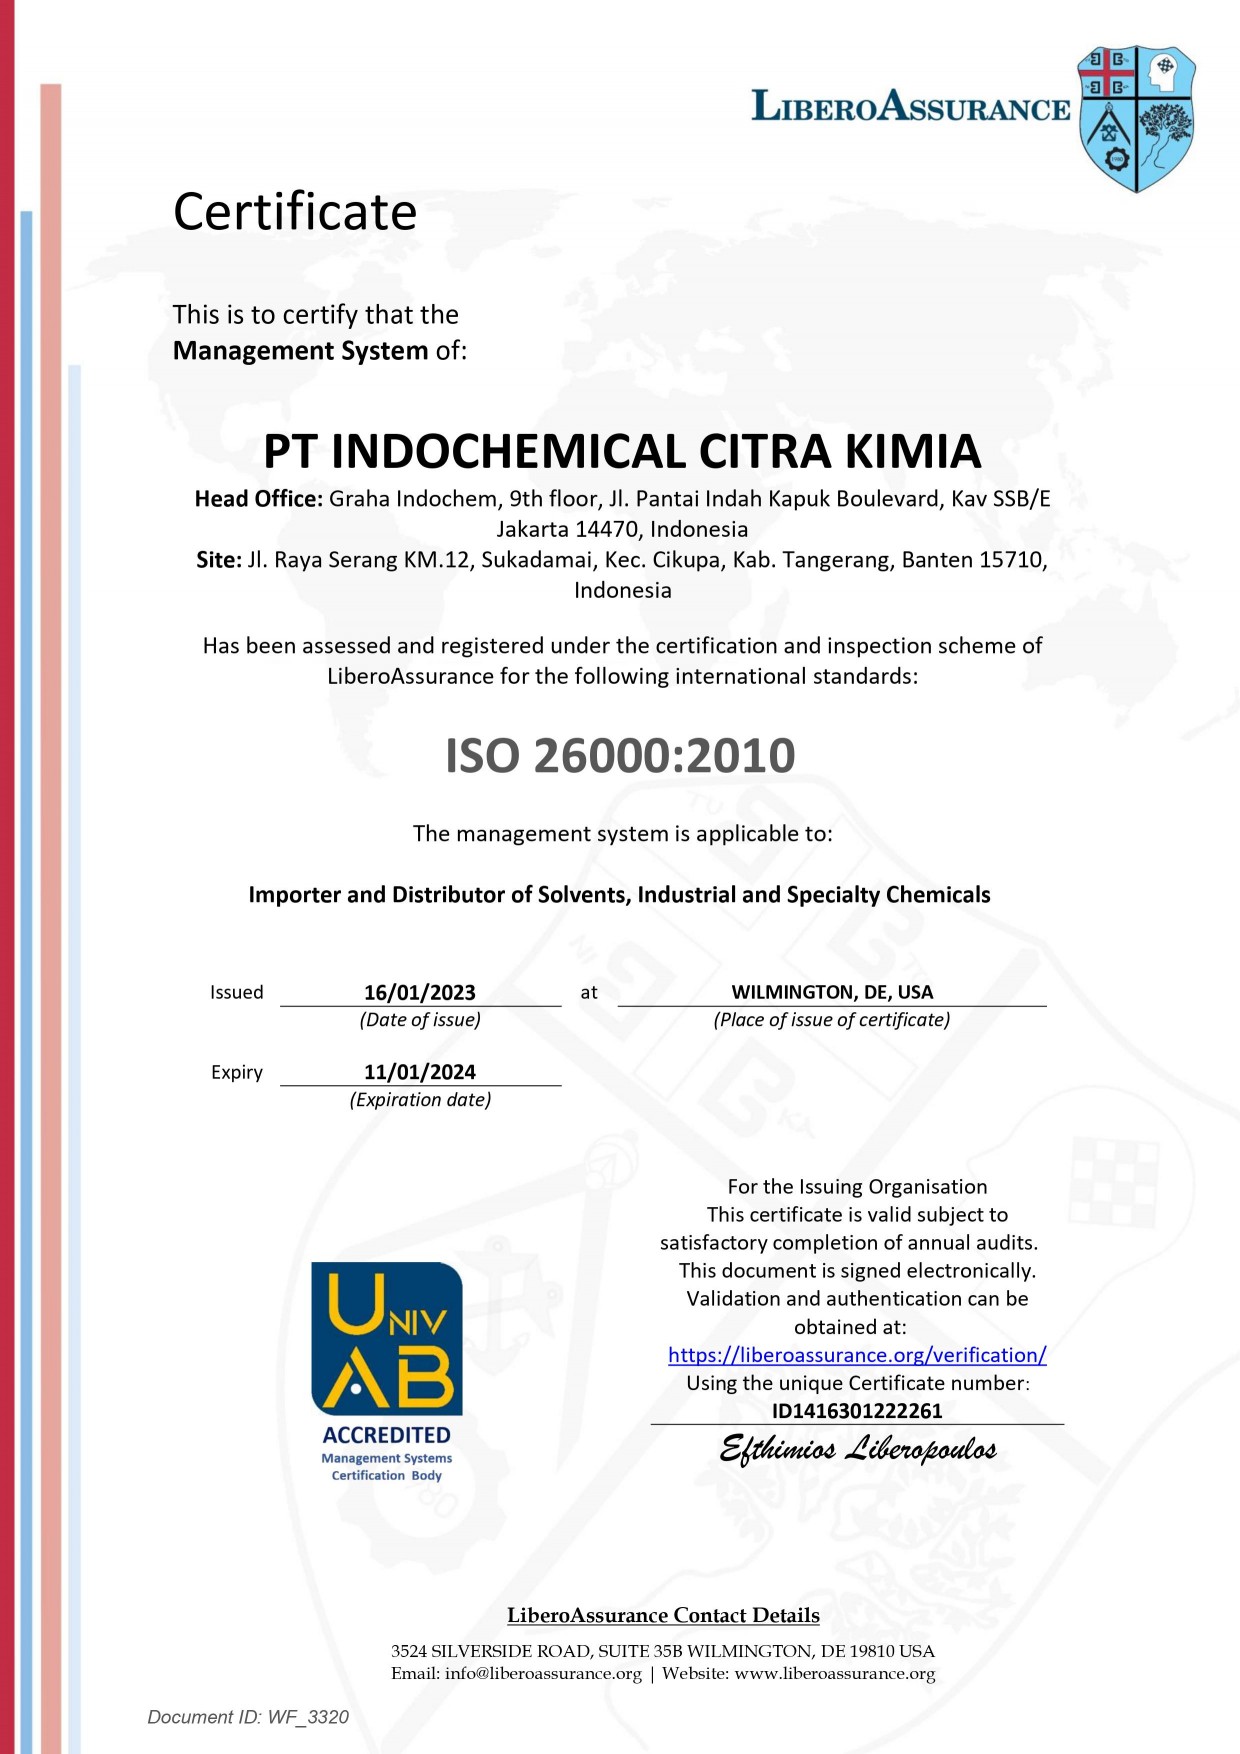 Management System as per ISO 26000:2010